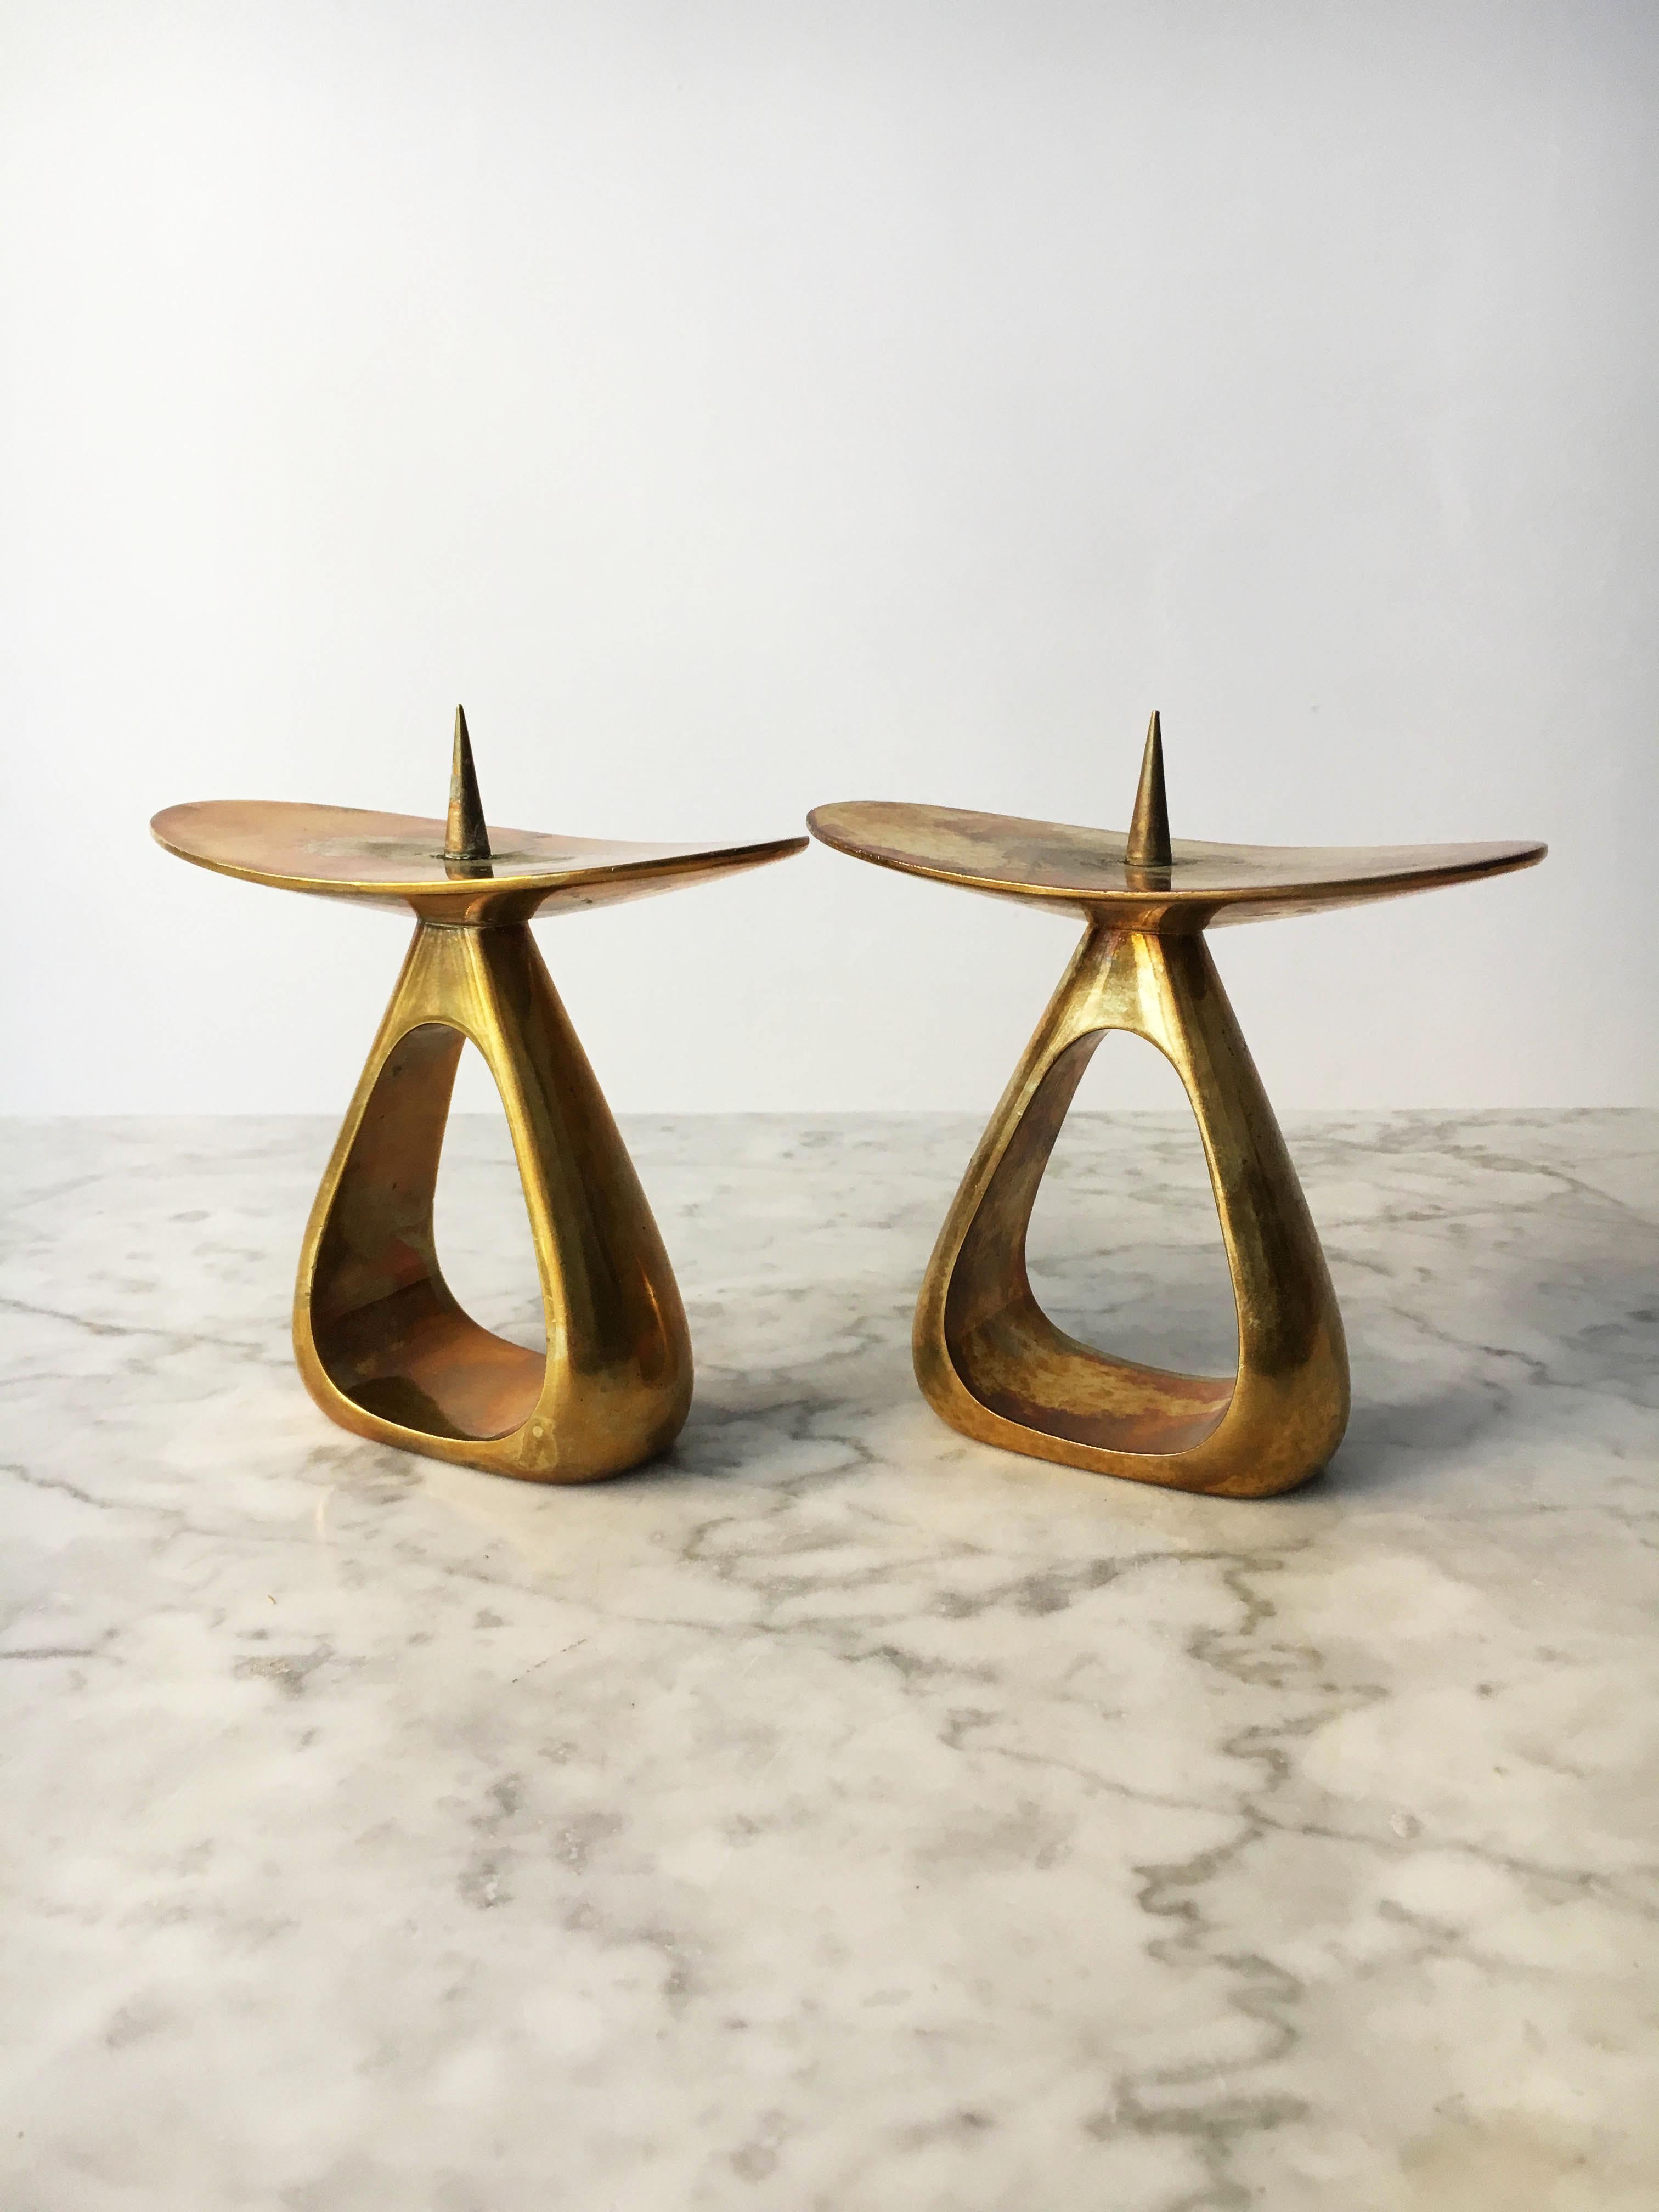 Carl Auböck candlesticks model 3600. This candlesticks is the largest variation of this Classic design by the Werkstätte Carl Aubock. Excellent vintage condition with just the right amount of patina on the solid brass. A rare find as a original pair